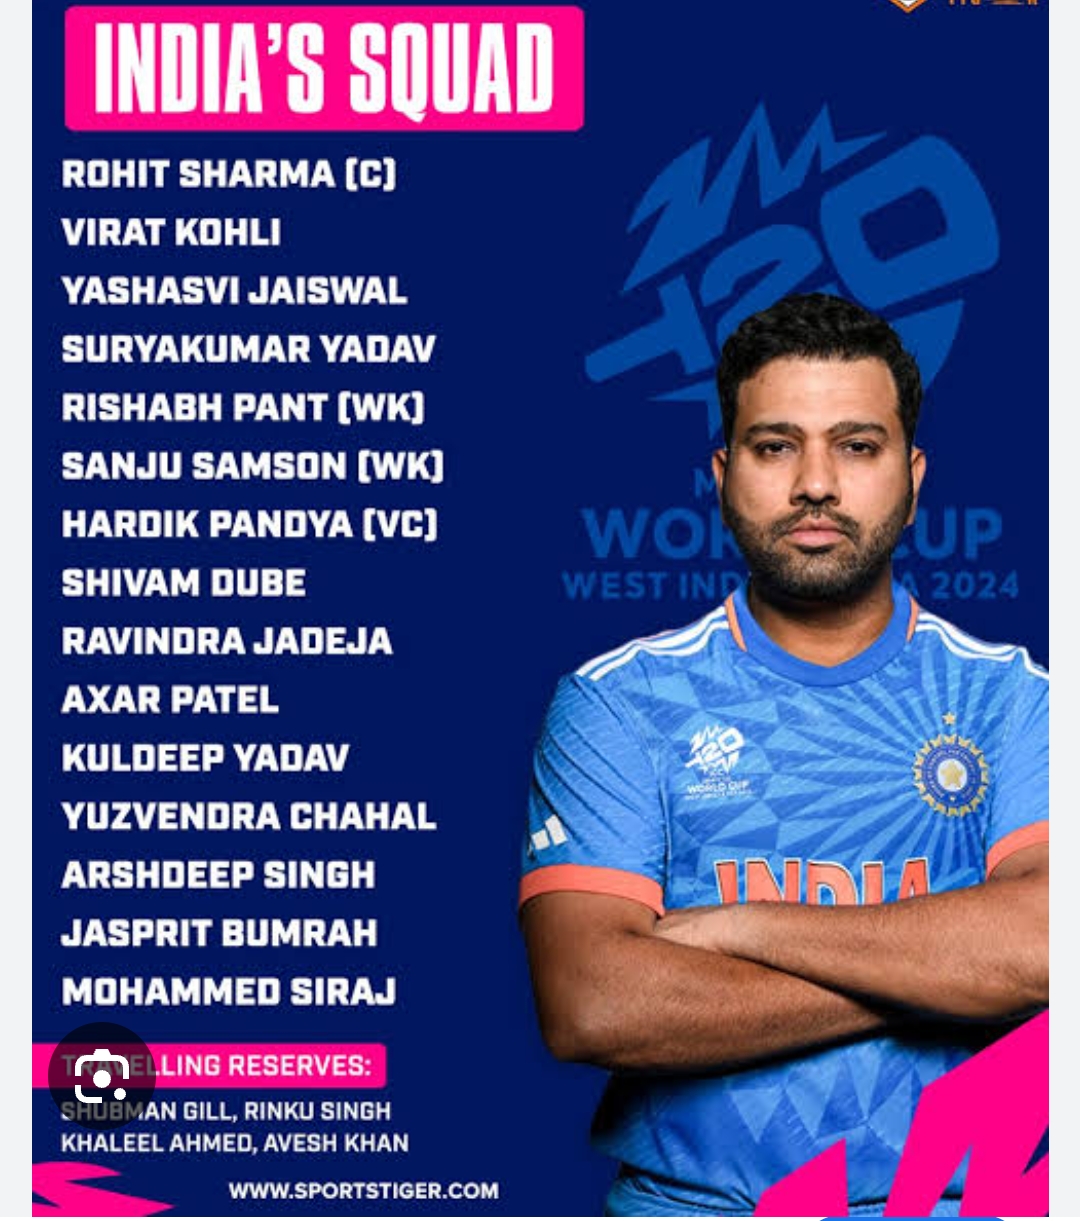 India Squad for T20 World Cup 2024 | India vs Pakistan | T20 World Cup 2024 | भारत-पाक | भारत और पाकिस्तान | भारत बनाम पाकिस्तान | India Squad for T20 World Cup 2024